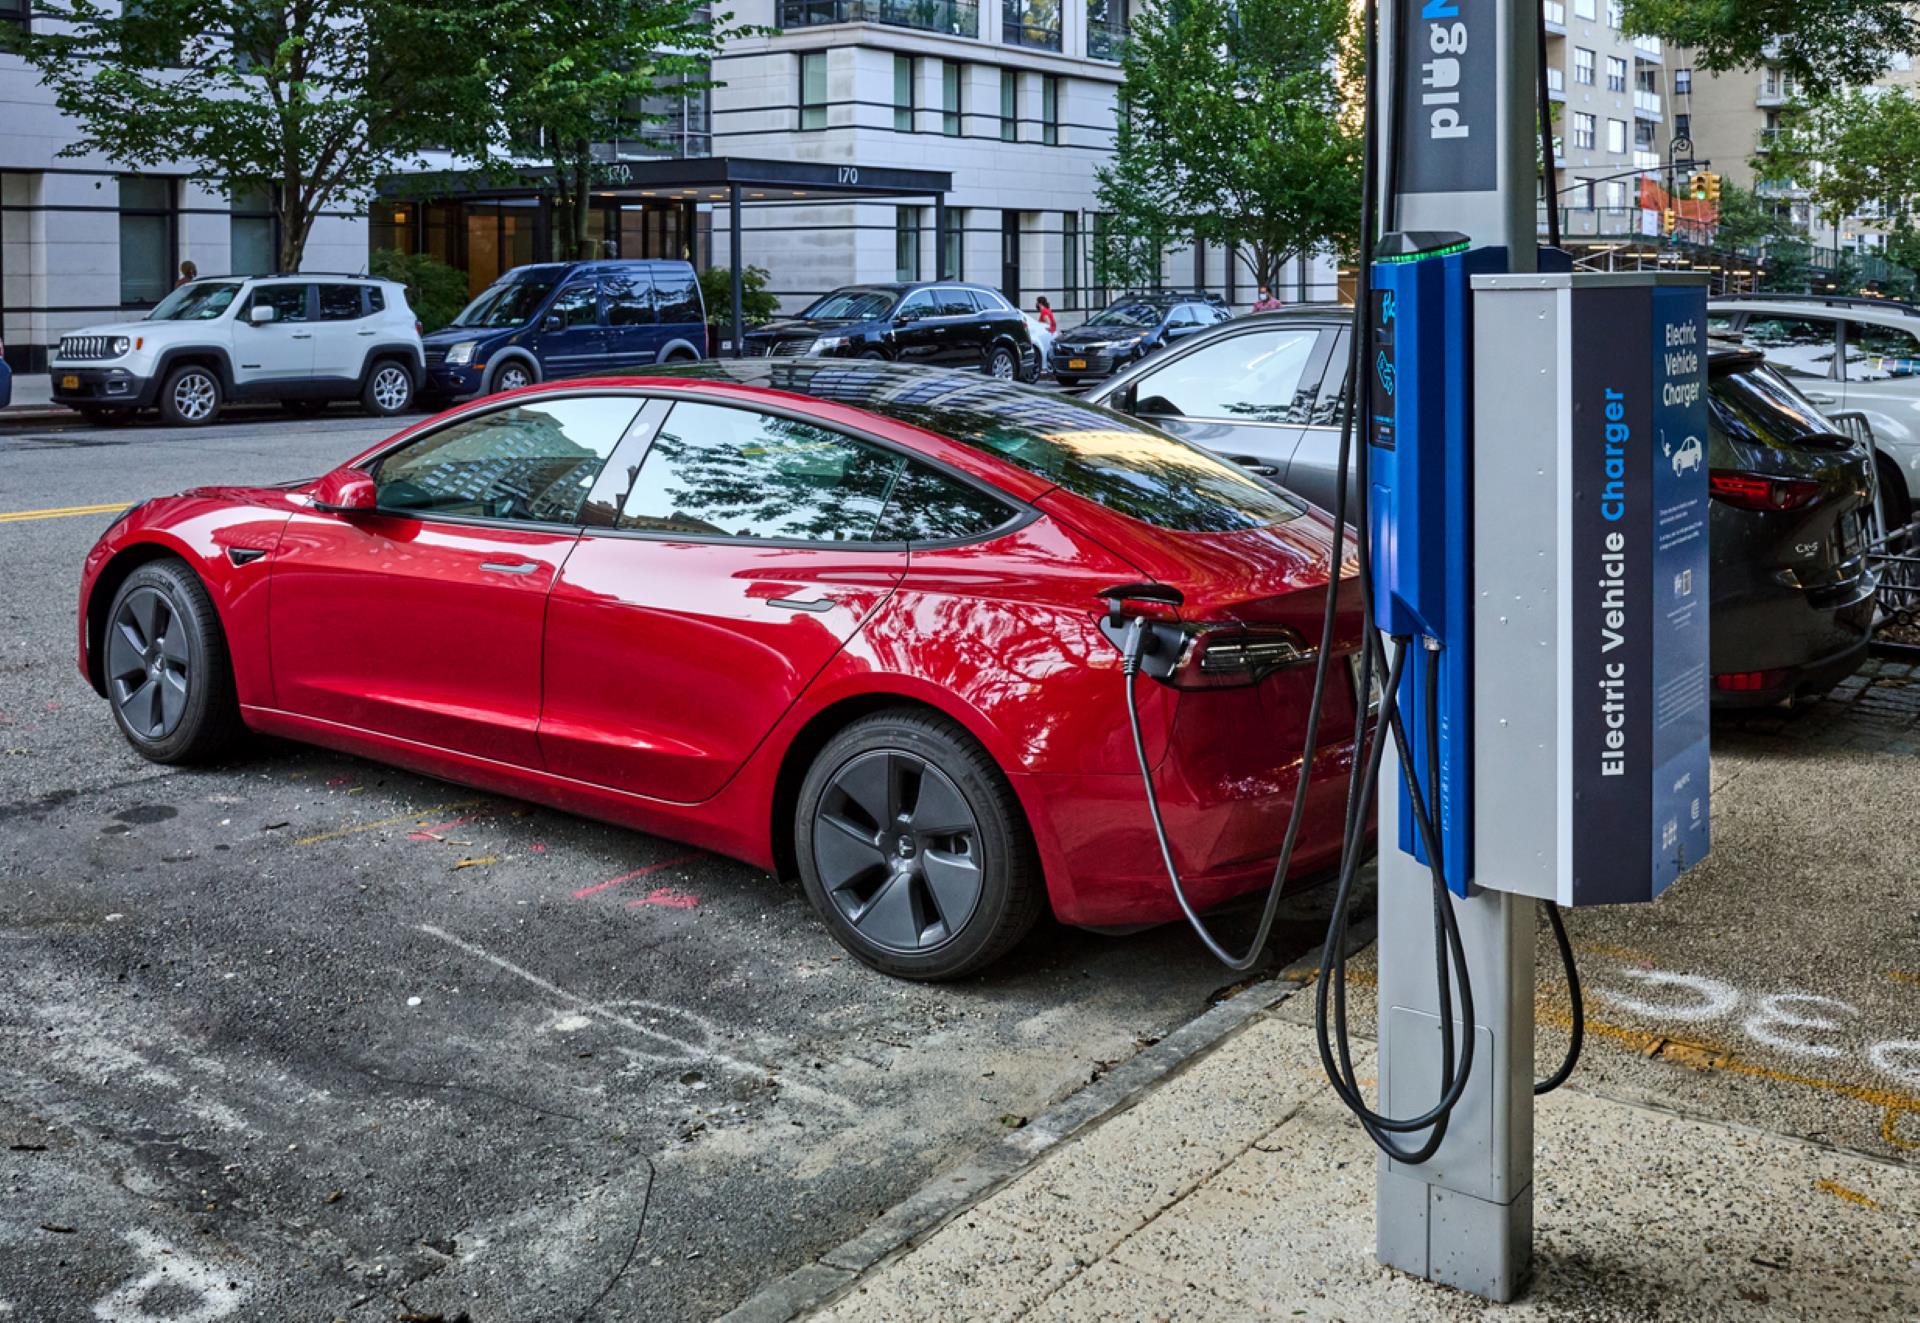 new-regulations-could-impact-the-price-of-certain-electric-vehicles